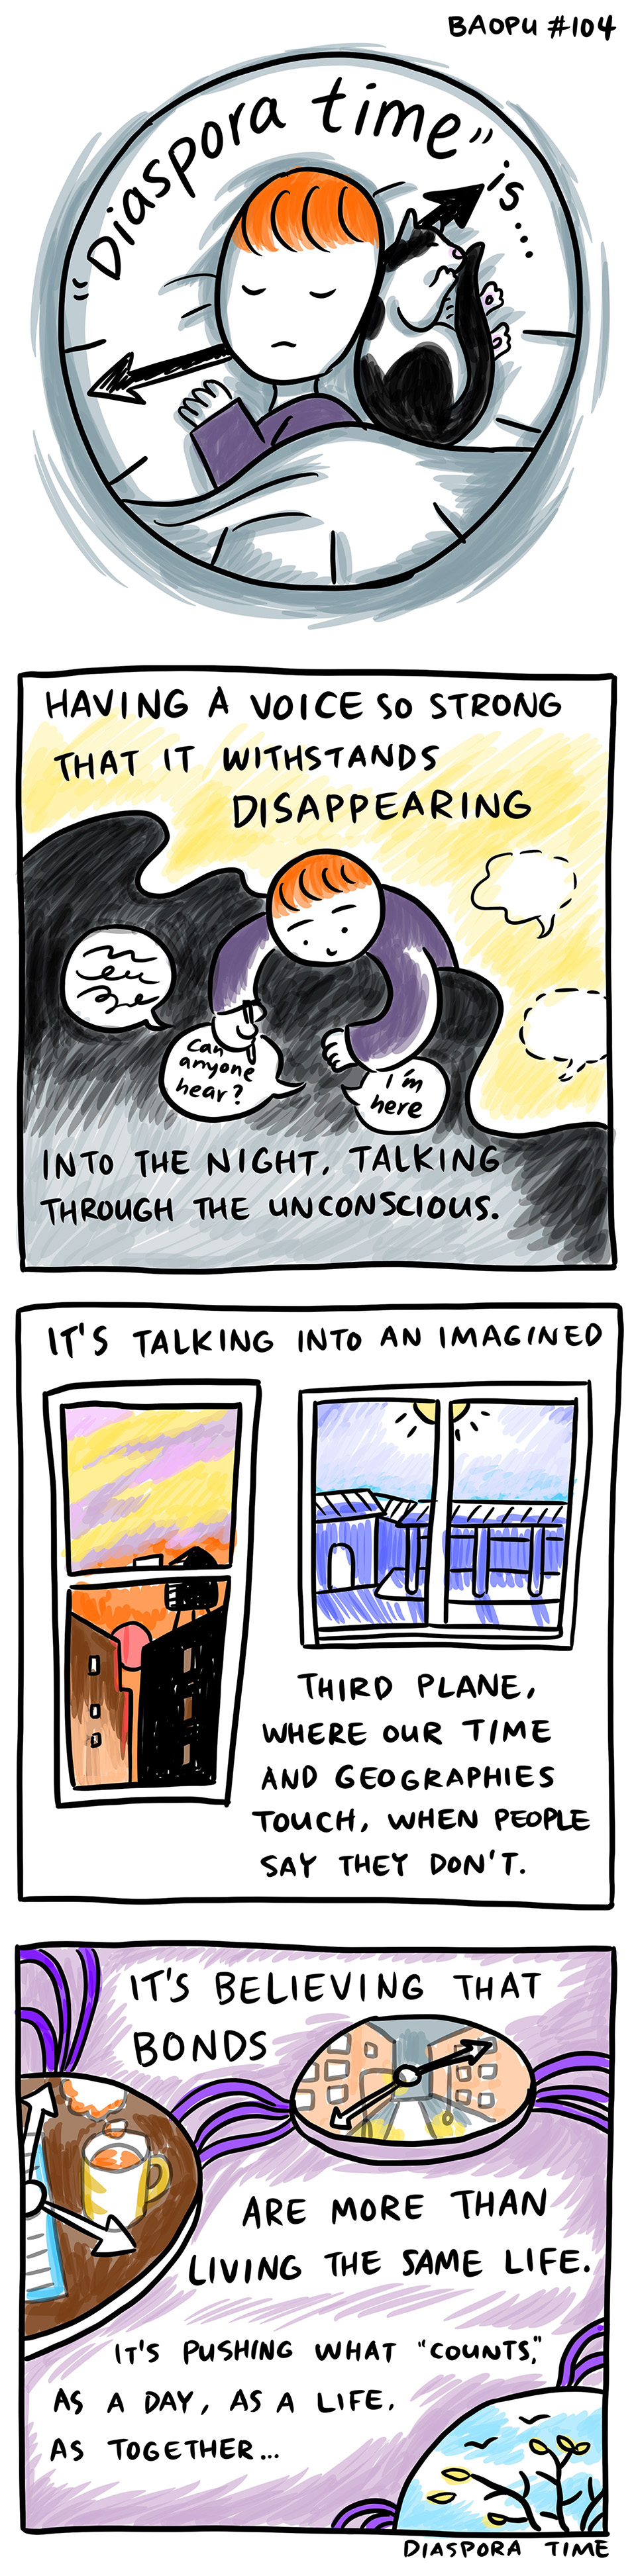 A five panel comic of Yao, an Asian person with red hair, writing on top of a black and yellow abstract background and daydreaming out of a window. It reads: Diaspora time" is HAVING A VOICE SO STRONG THAT IT WITHSTANDS DISAPPEARING INTO THE NIGHT, TALKING THROUGH THE UNCONSCIOUS. IT'S TALKING INTO AN IMAGINED THIRD PLANE WHERE OUR TIME AND GEOGRAPHIES TOUCH, WHEN PEOPLE SAY THEY DON'T. ITS BELIEVING THAT BONDS ARE MORE THAN LIVING THE SAME LIFE, IT'S PUSHING WHAT "COUNTS" AS A DAY, AS A LIFE. AS TOGETHER. DIASPORA.